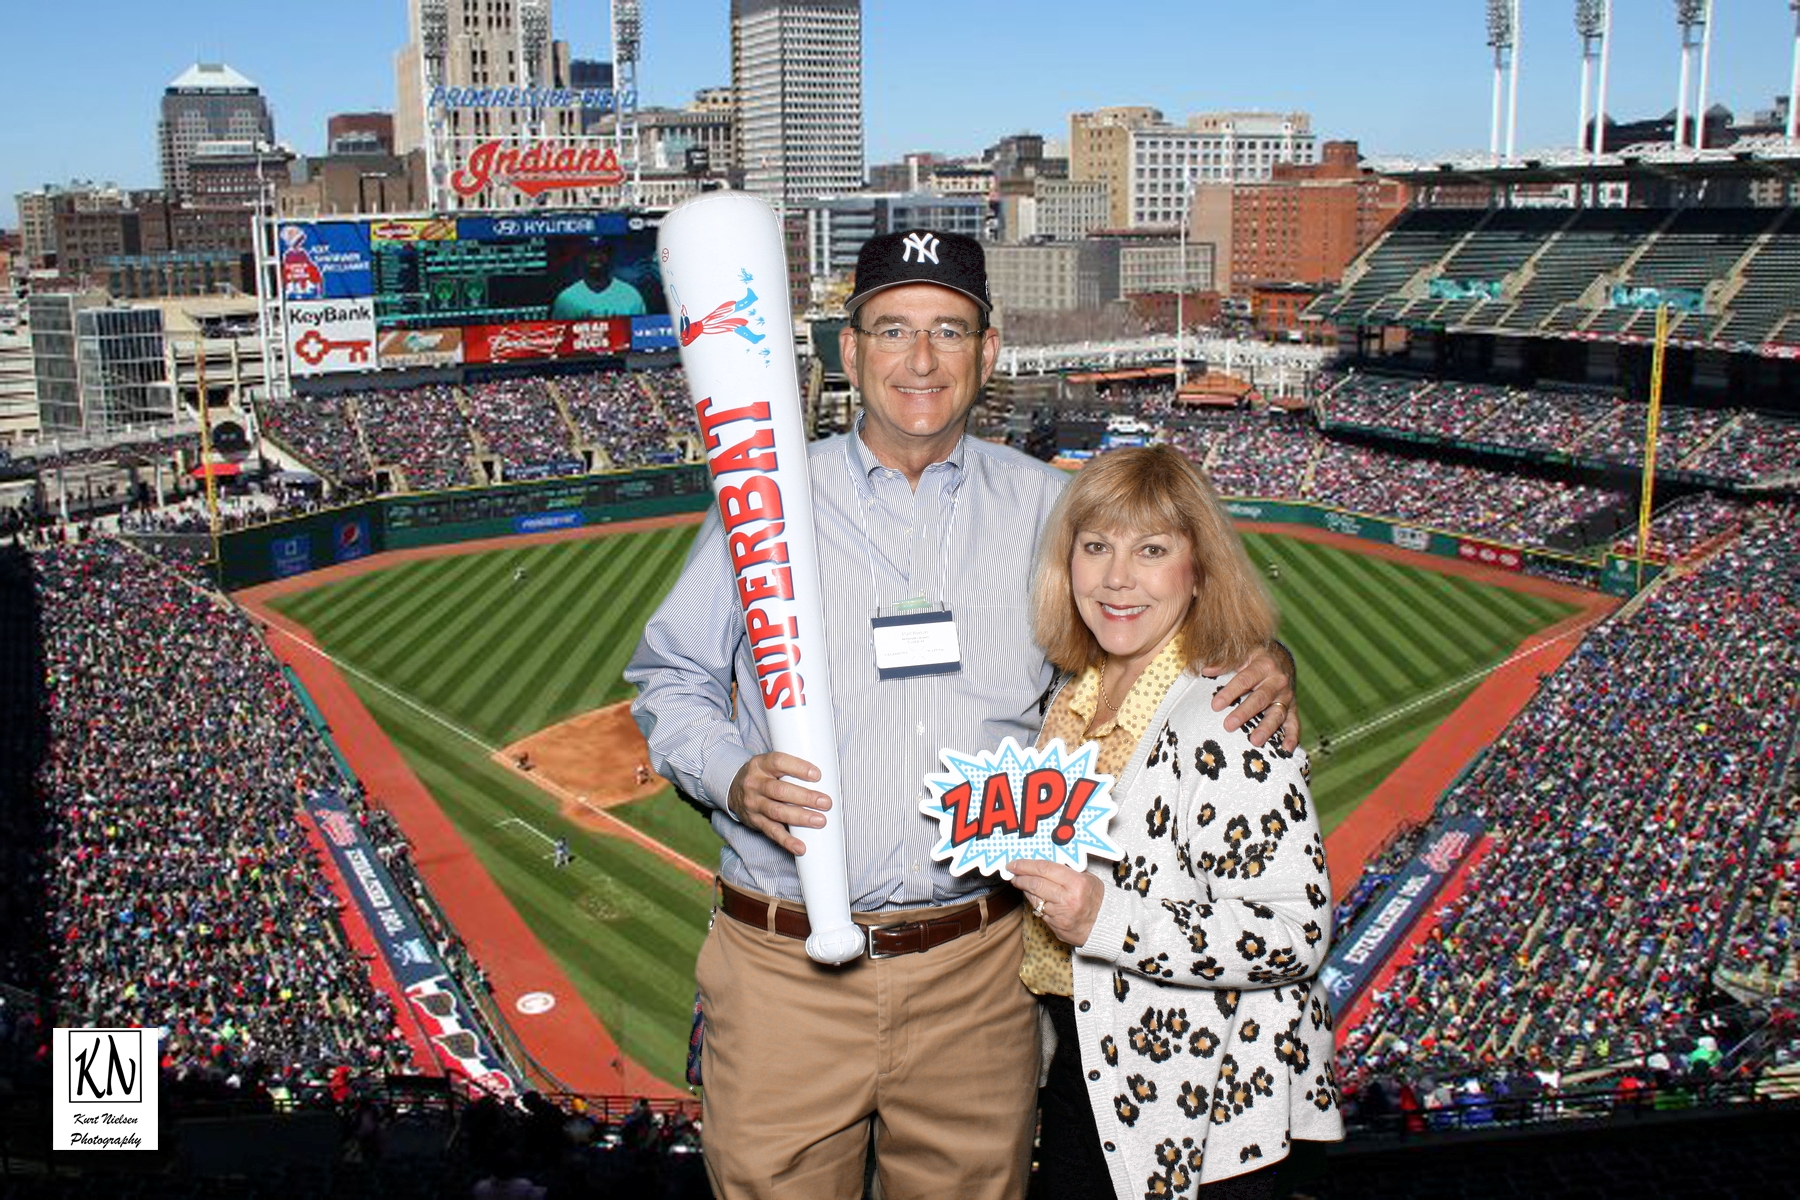 photo booth at progressive field in Cleveland